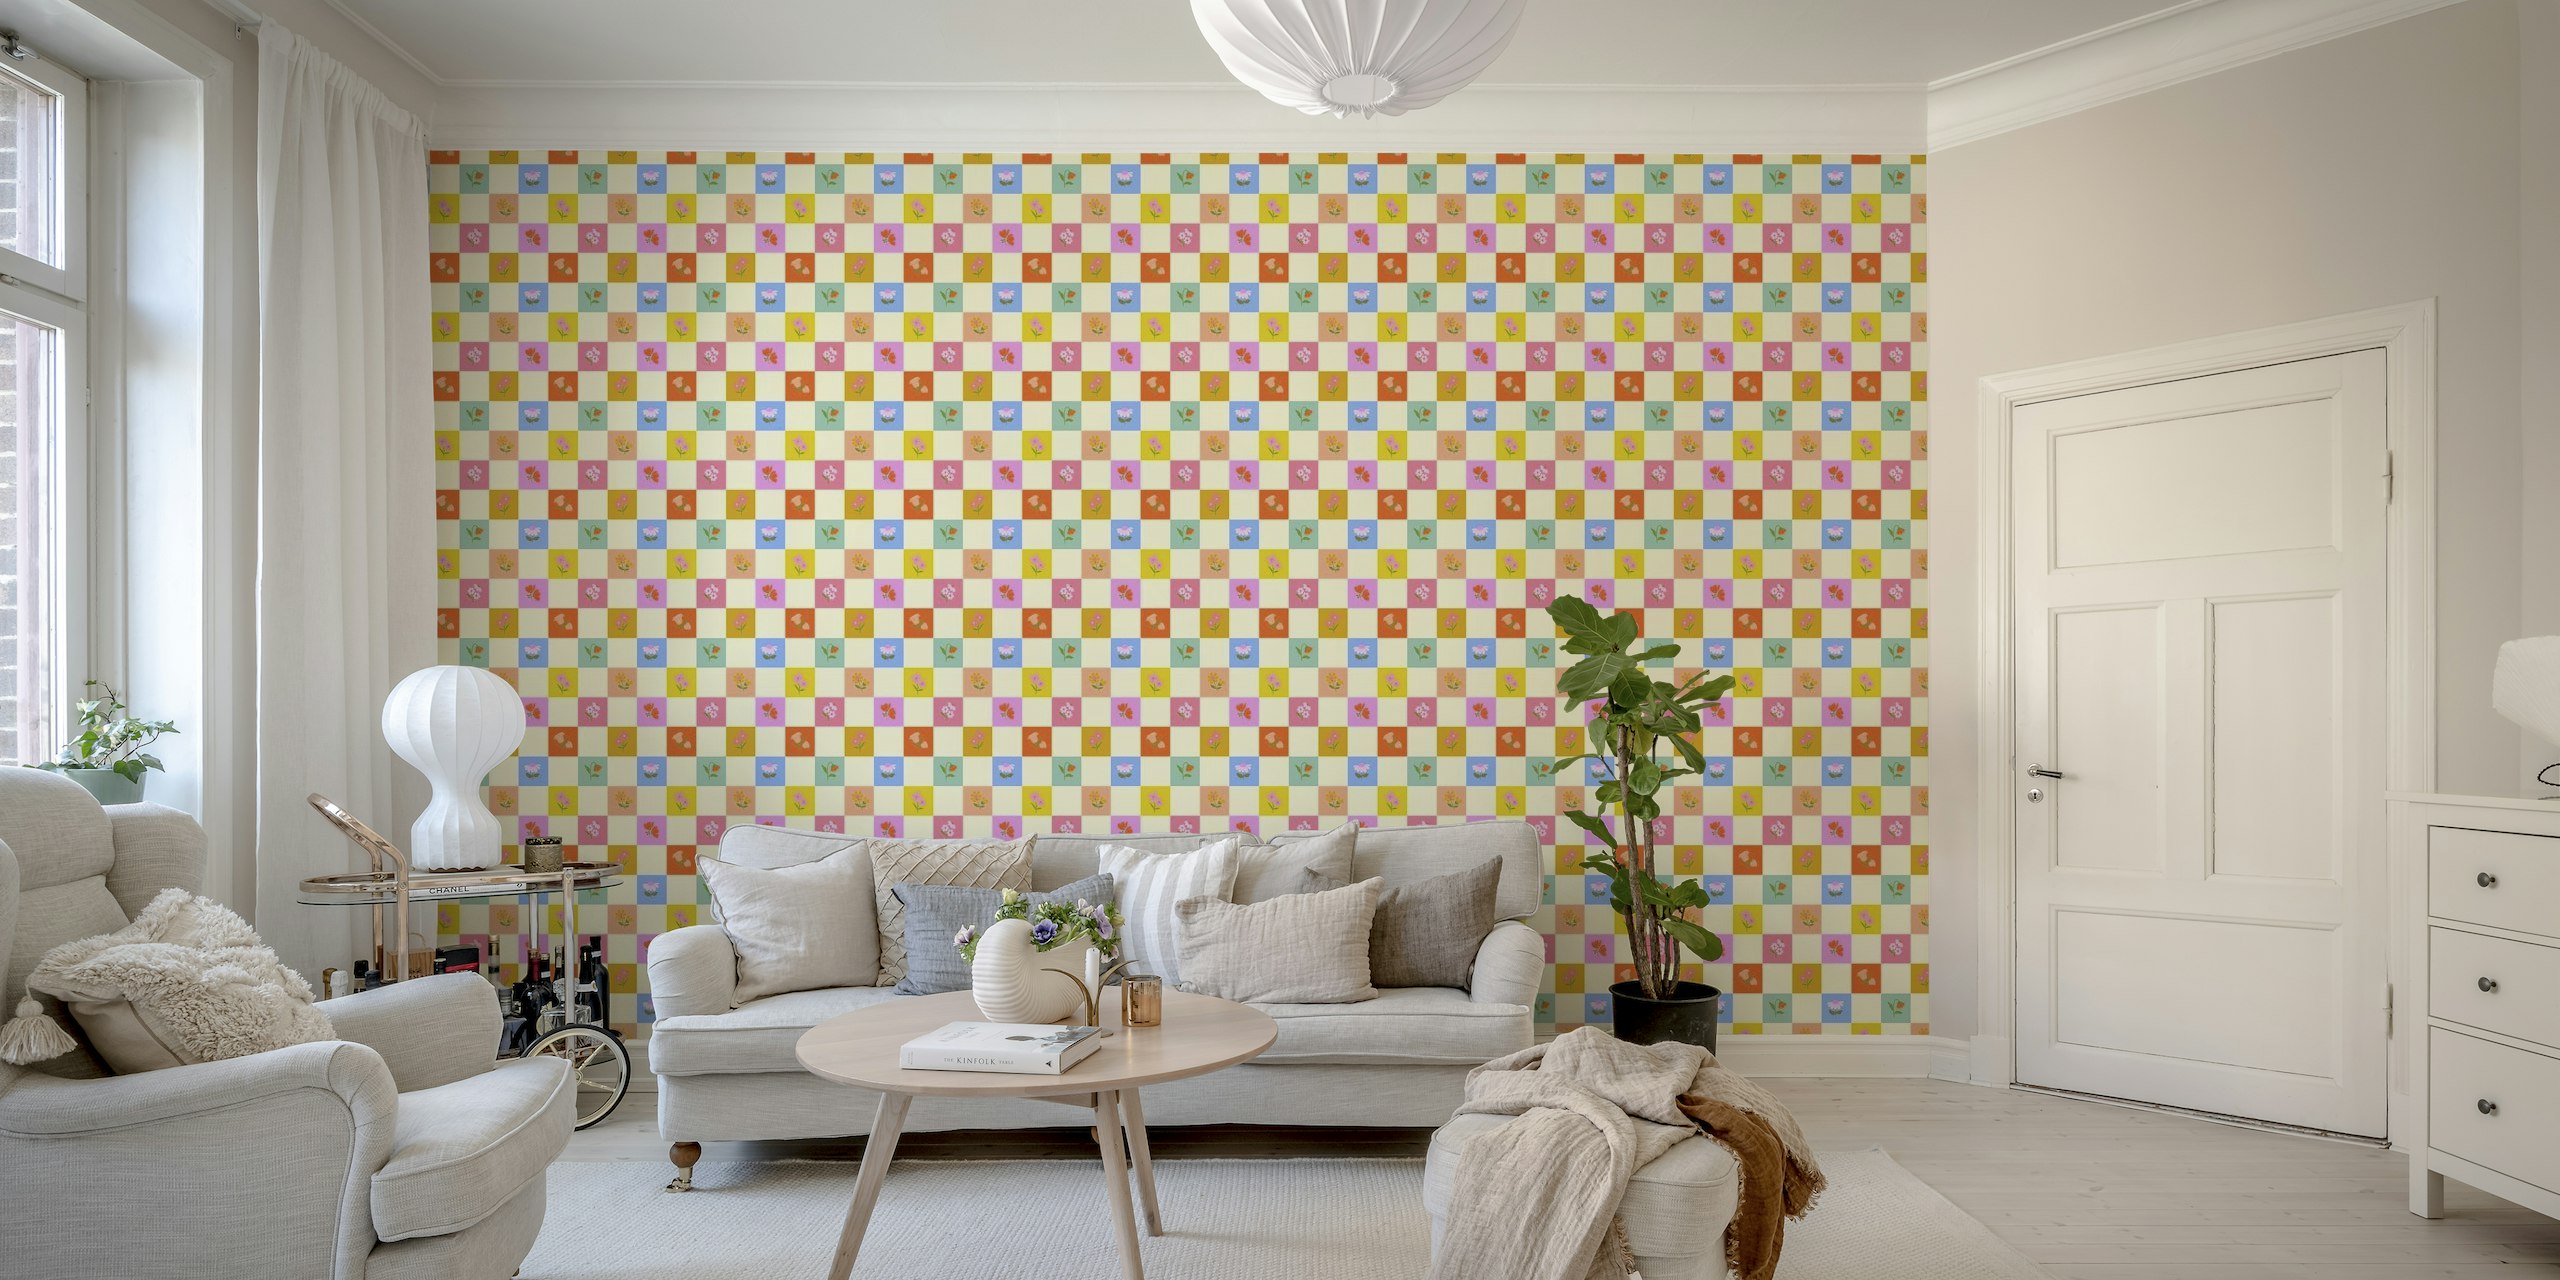 Checkered Floral Pattern wallpaper